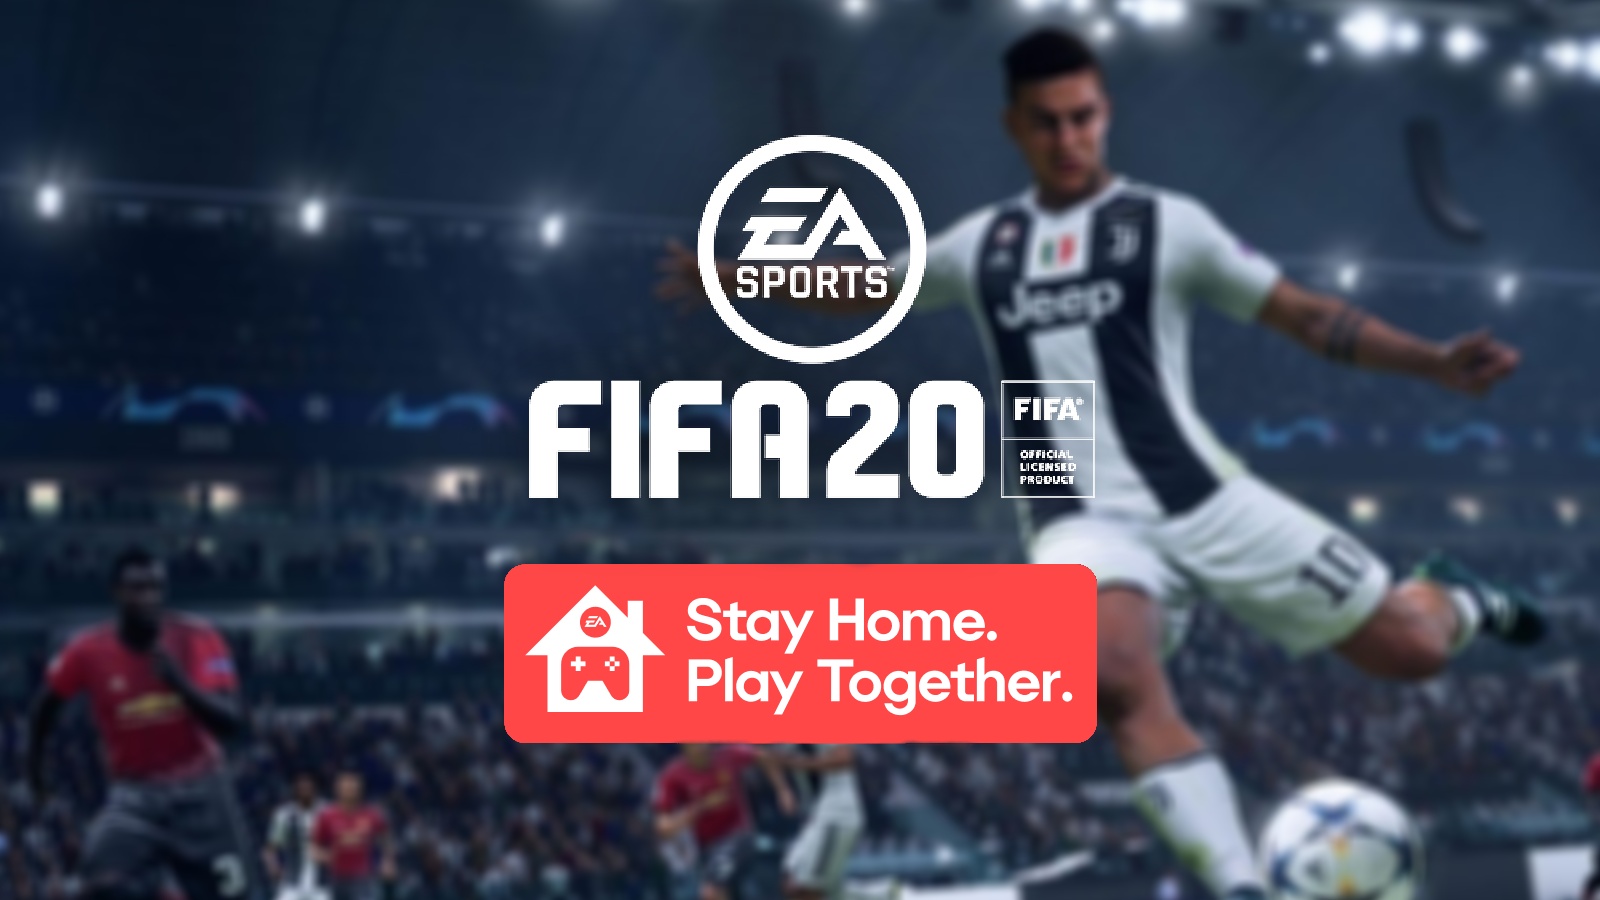 FIFA 20 Stay and Play Cup